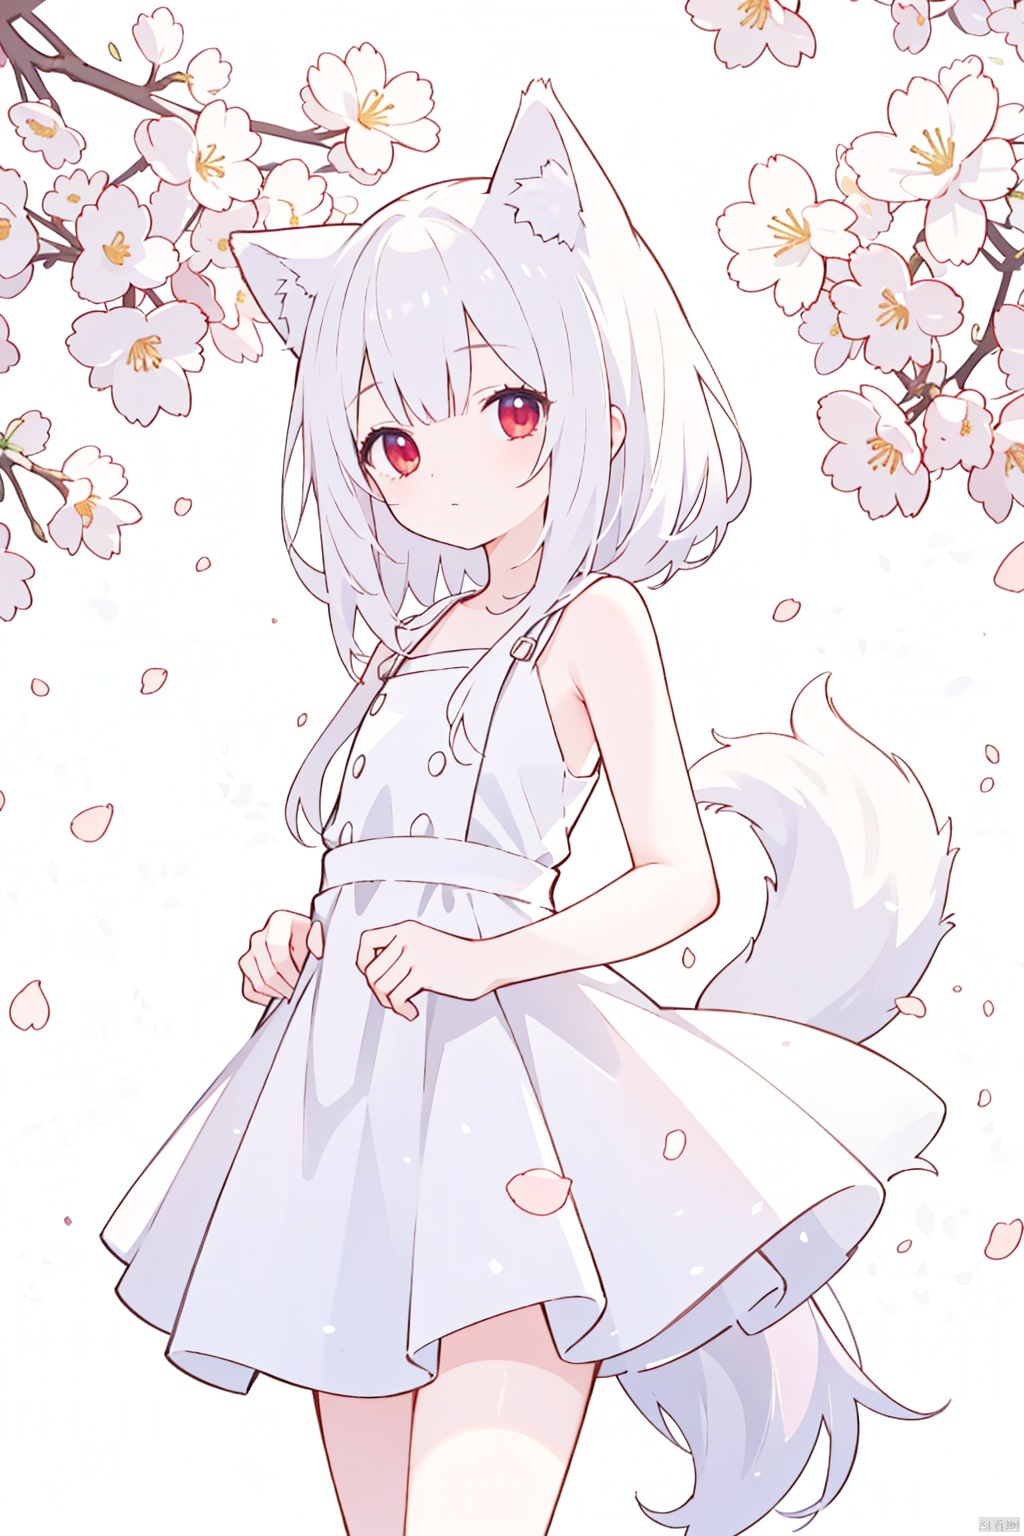  The image features a beautiful anime girl dressed in a flowing white and red dress, standing amidst a flurry of red cherry blossoms. The contrast between her white dress and the red flowers creates a striking visual effect. The lighting in the image is well-balanced, casting a warm glow on the girl and the surrounding flowers. The colors are vibrant and vivid, with the red cherry blossoms standing out against the white sky. The overall style of the image is dreamy and romantic, perfect for a piece of anime artwork. The quality of the image is excellent, with clear details and sharp focus. The girl's dress and the flowers are well-defined, and the background is evenly lit, without any harsh shadows or glare. From a technical standpoint, the image is well-composed, with the girl standing in the center of the frame, surrounded by the blossoms. The use of negative space in the background helps to draw the viewer's attention to the girl and the flowers. The cherry blossoms, often associated with transience and beauty, further reinforce this theme. The girl, lost in her thoughts, seems to be contemplating the fleeting nature of beauty and the passage of time. Overall, this is an impressive image that showcases the photographer's skill in capturing the essence of a scene, as well as their ability to create a compelling narrative through their art. wolf girl,loli,wolf girl,white hair,red eyes,,white dress,bare shoulders,( large tail), flat chest, colors